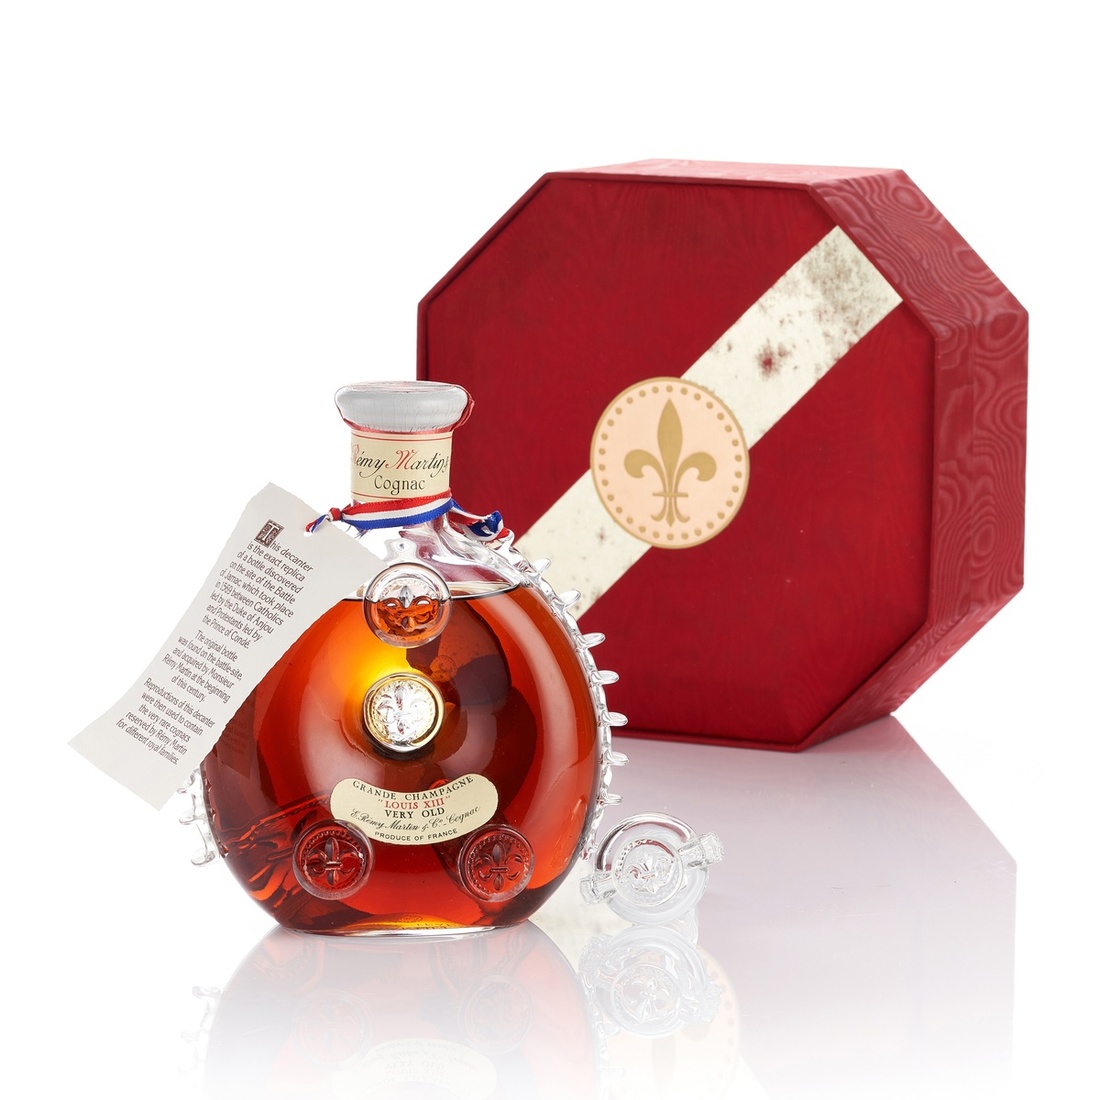 Sold at Auction: Baccarat Remy Martin Louis XIII Cognac Decanter